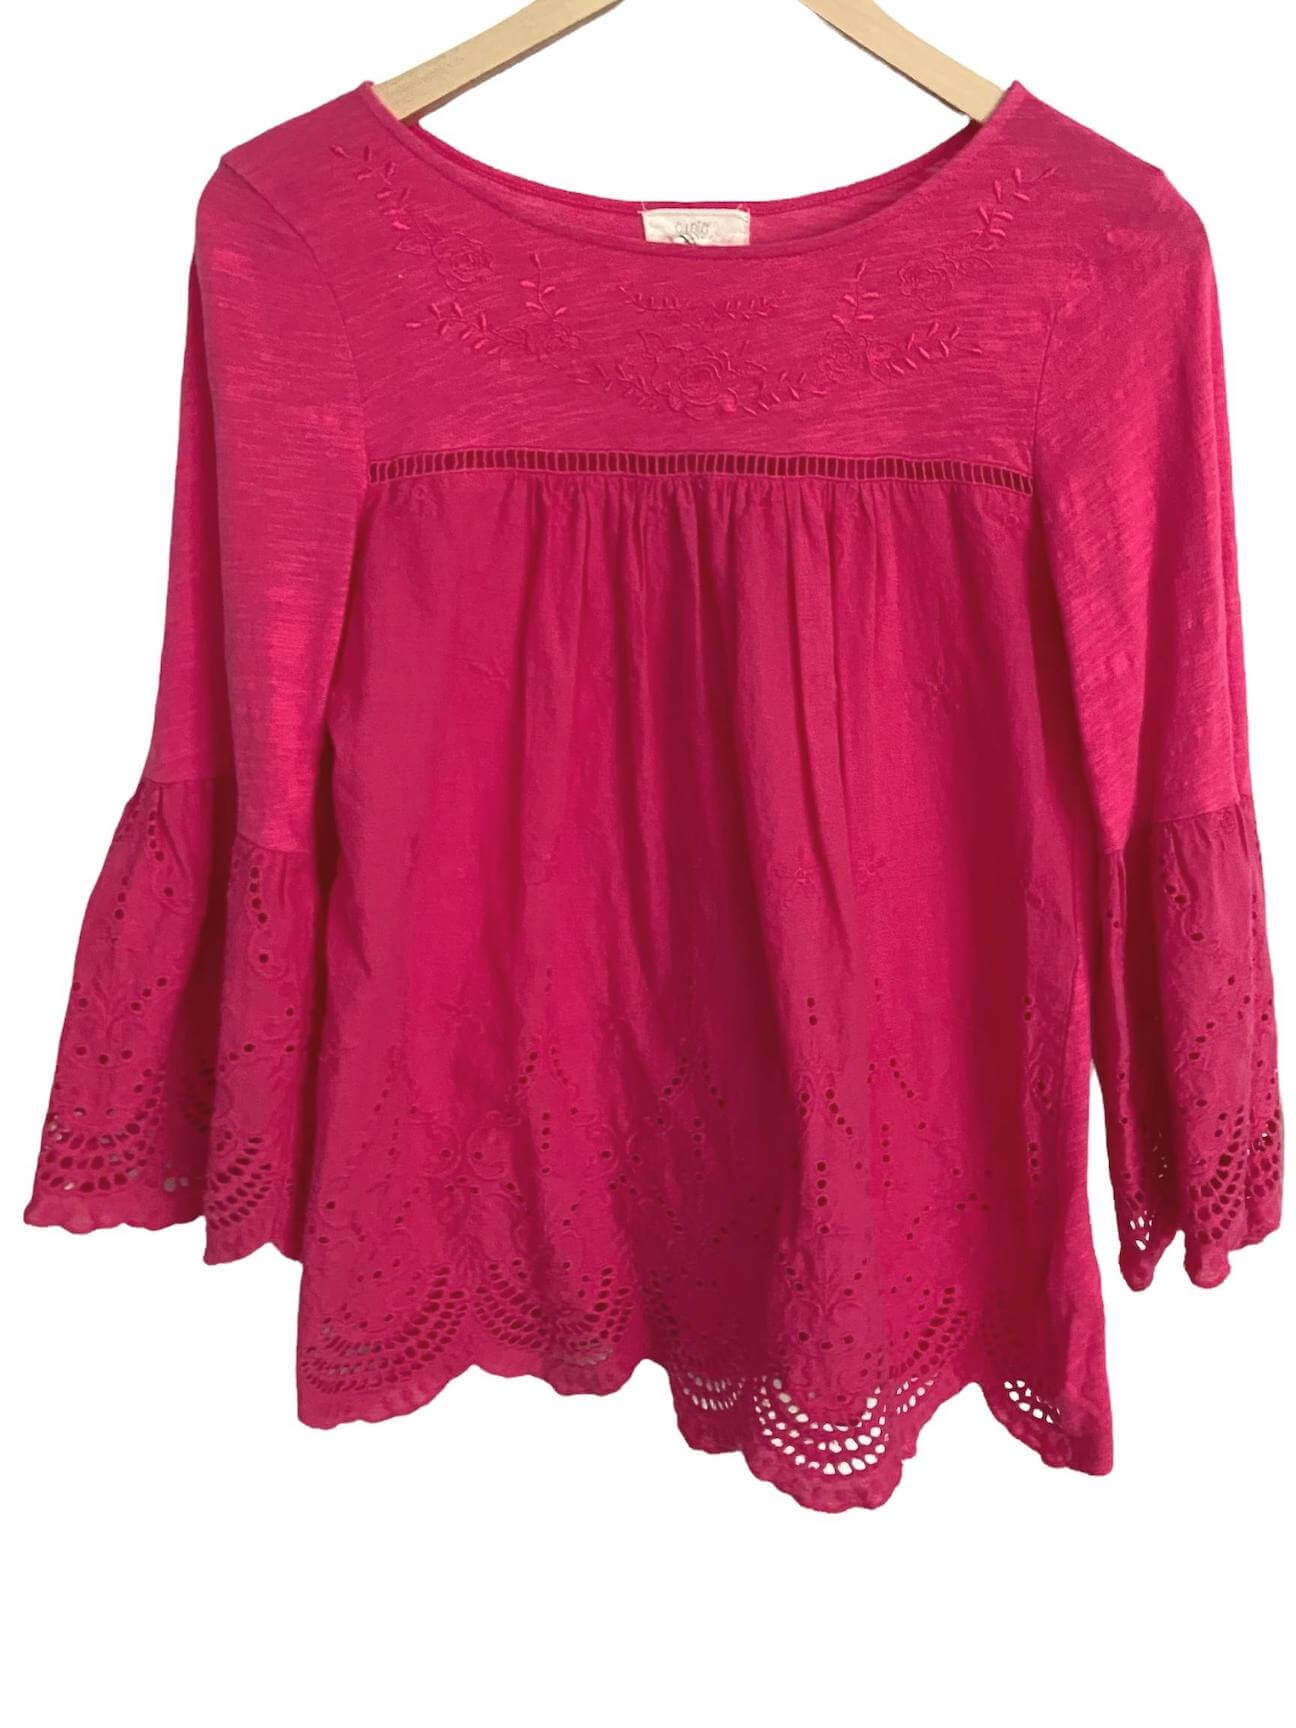 Light Summer CUPIO strawberry pink embroidered eyelet top